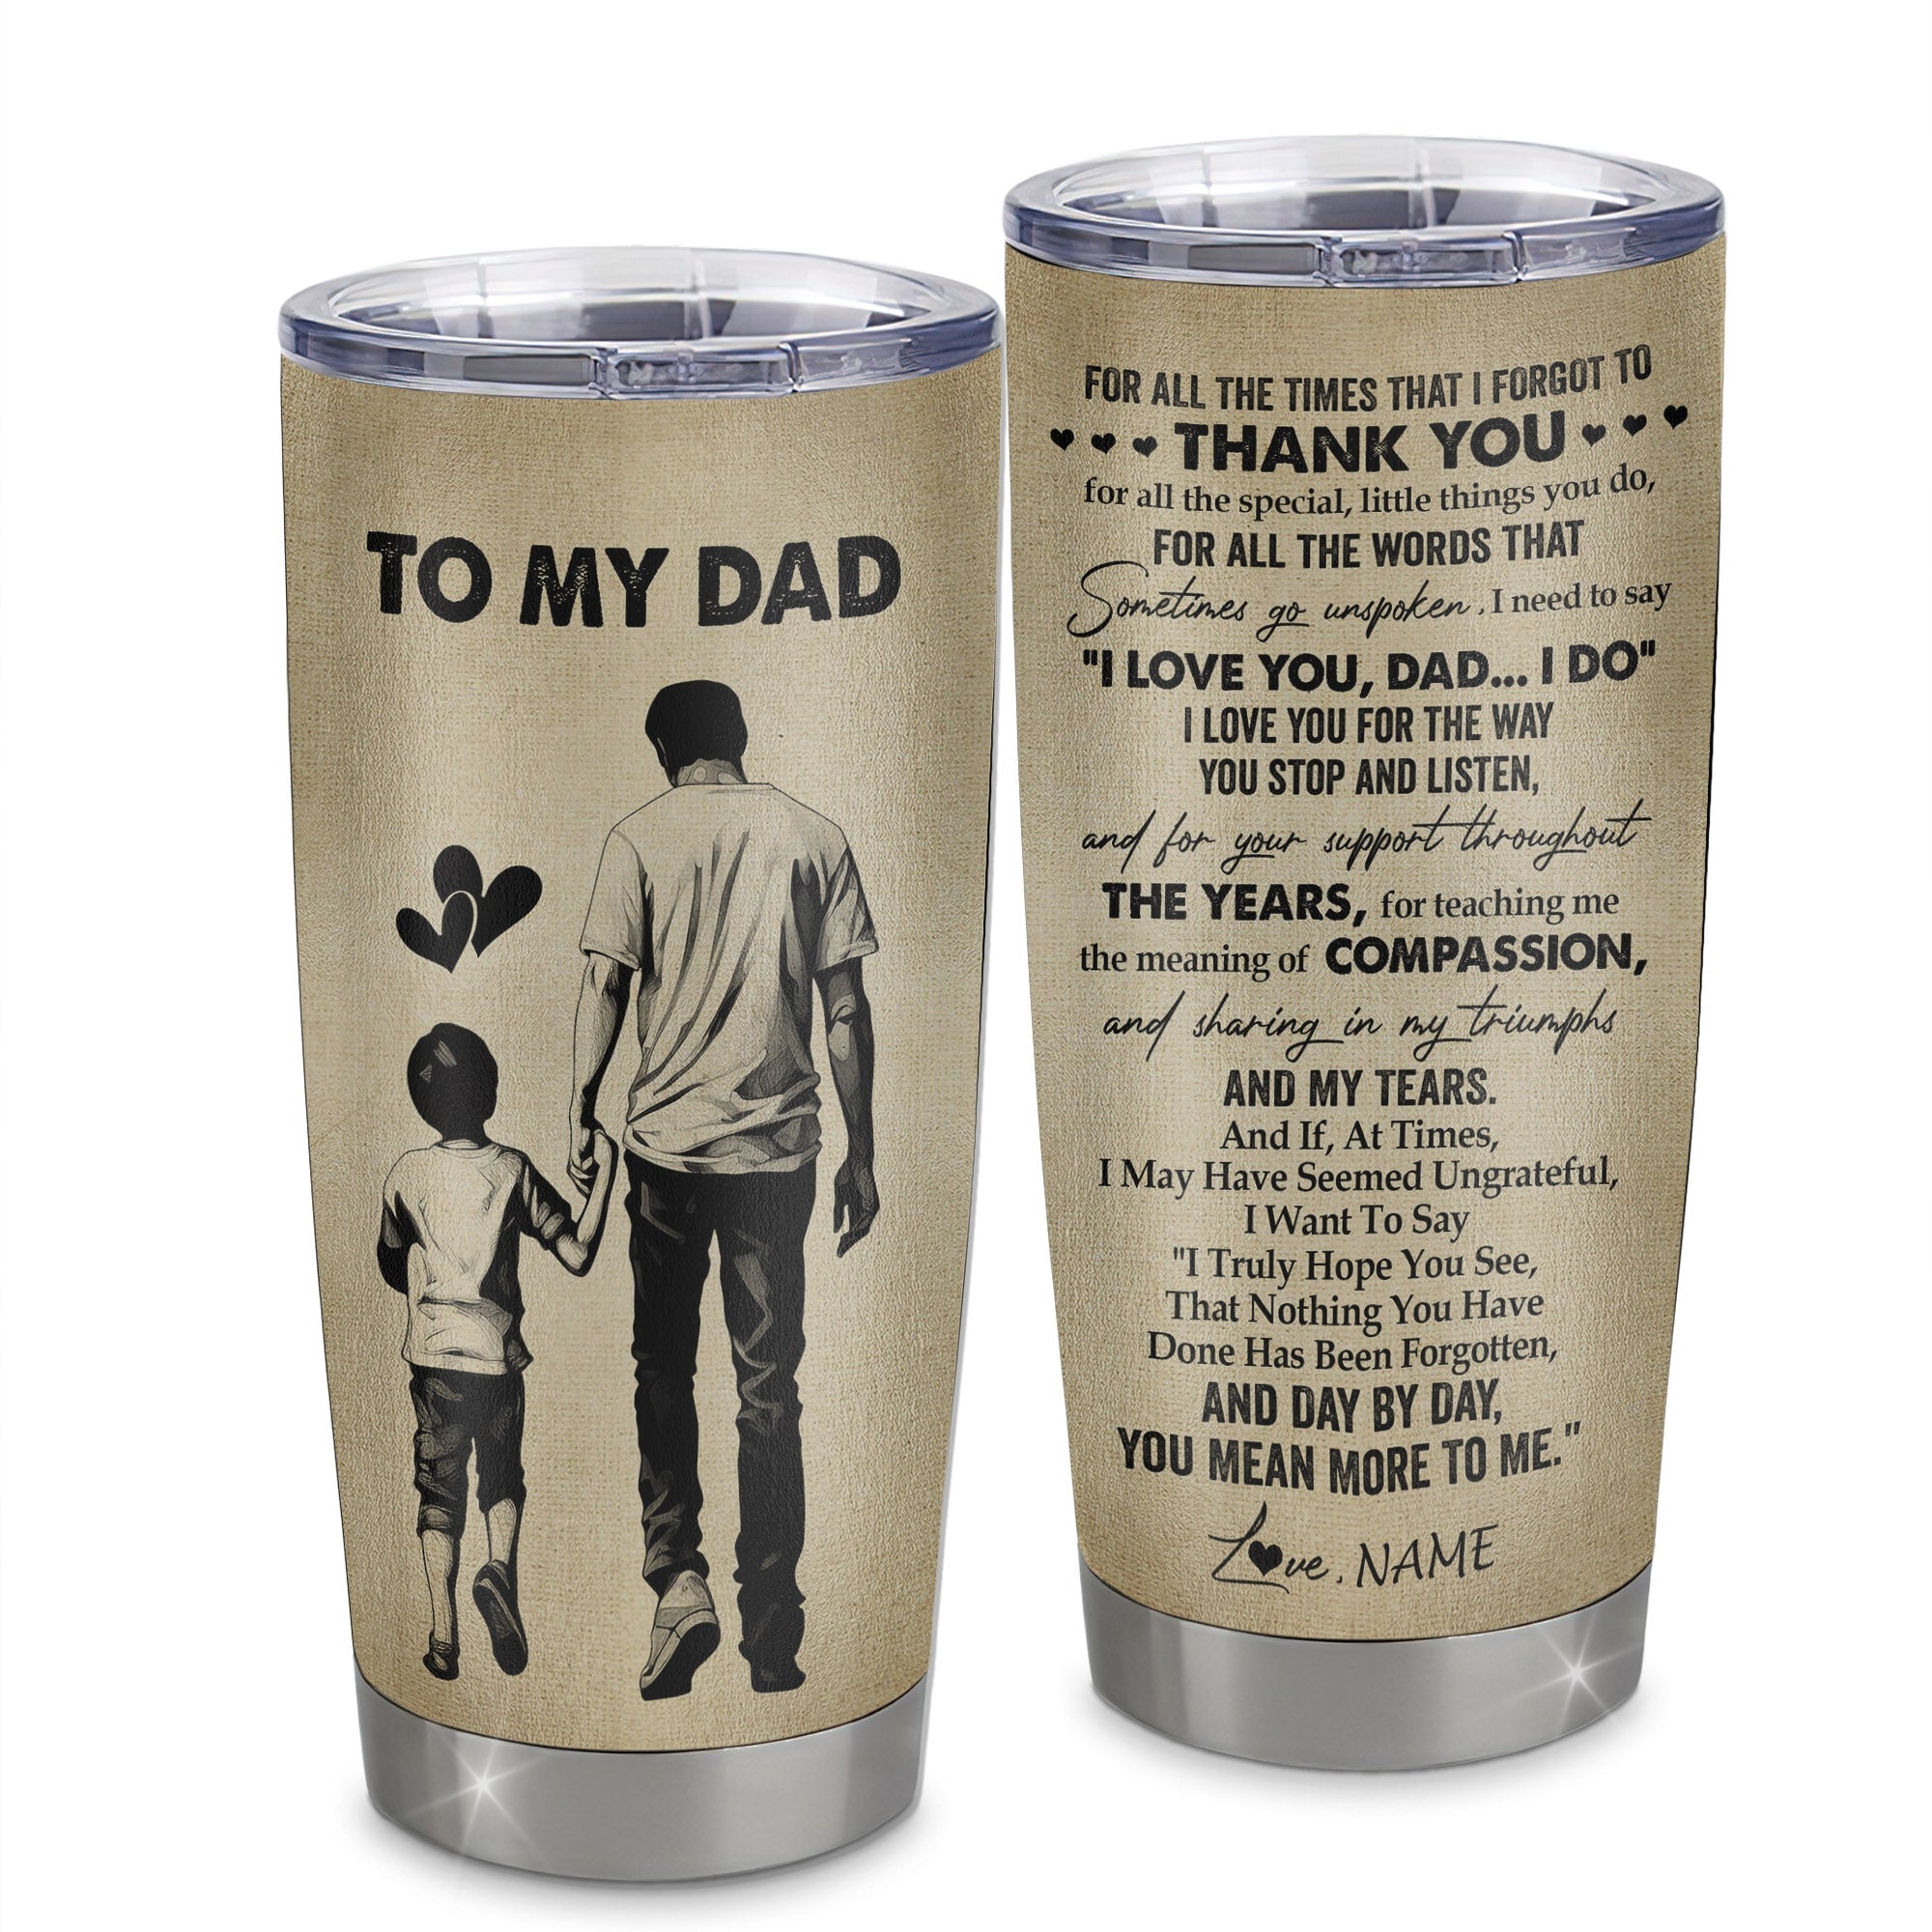 https://siriustee.com/cdn/shop/files/Personalized_To_My_Dad_Tumbler_From_Son_Stainless_Steel_Cup_For_All_The_Times_That_I_Forgot_To_Thank_You_Dad_Birthday_Fathers_Day_Christmas_Travel_Mug_Tumbler_mockup_1_2000x.jpg?v=1685156556